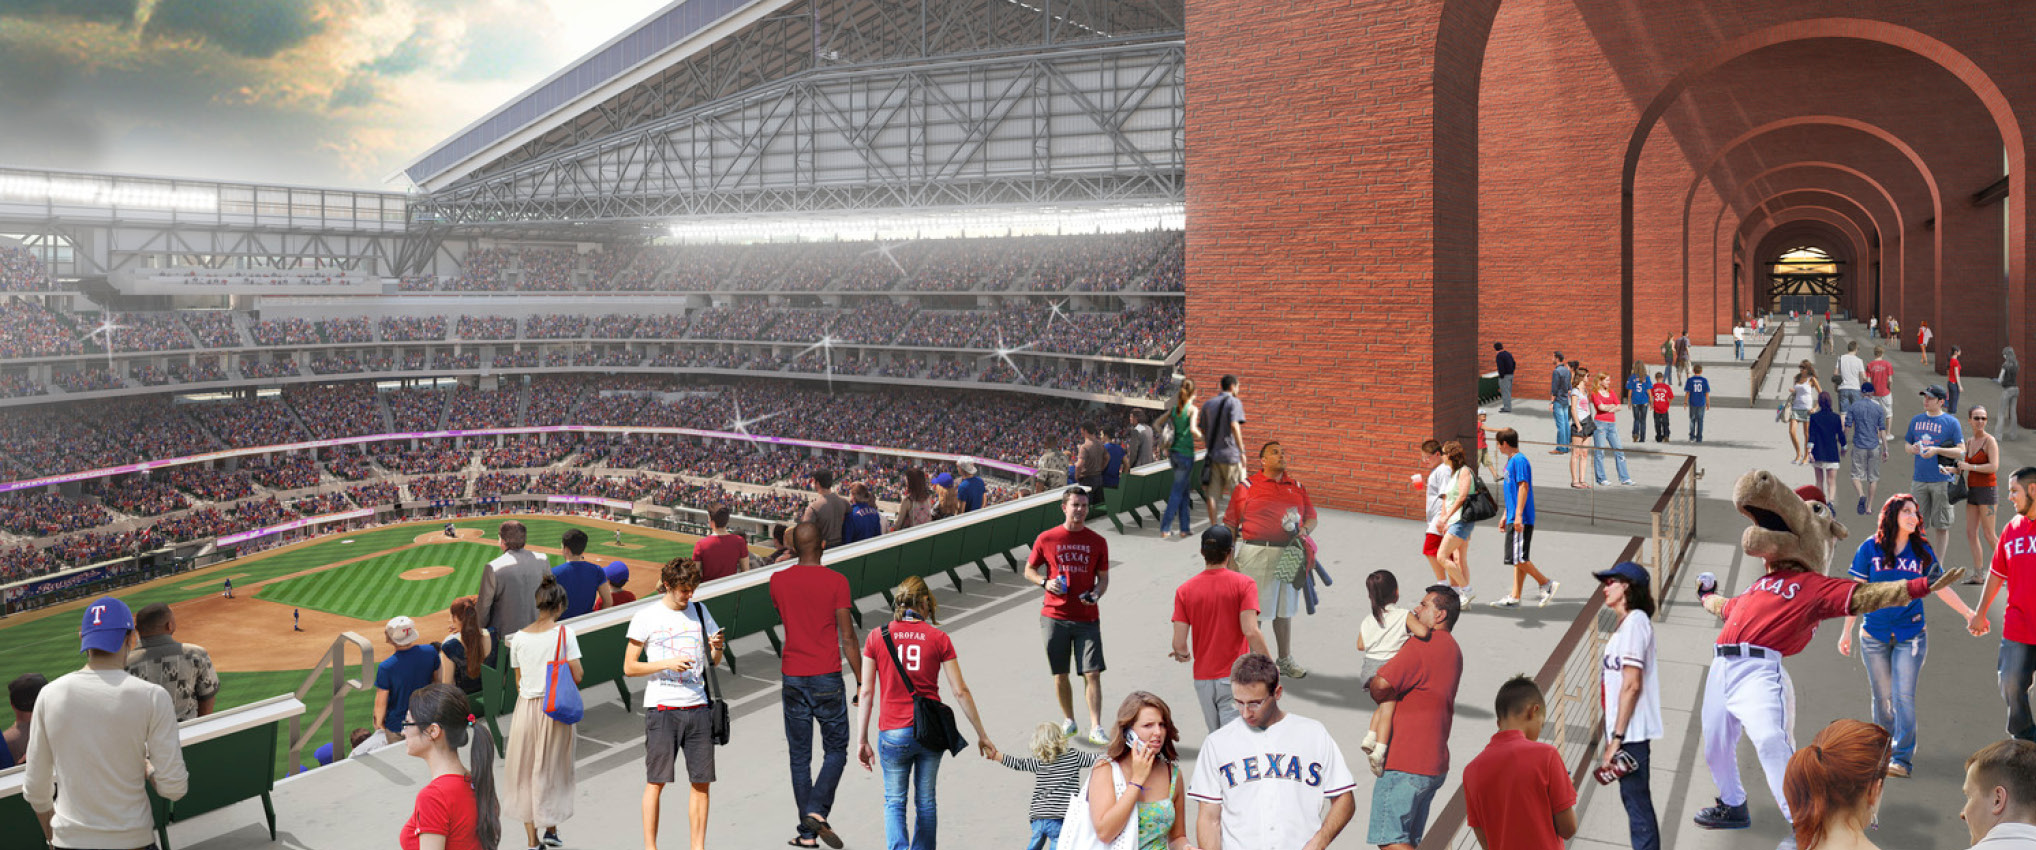 HKS-Designed Globe Life Field Ballpark To Feature New Technology